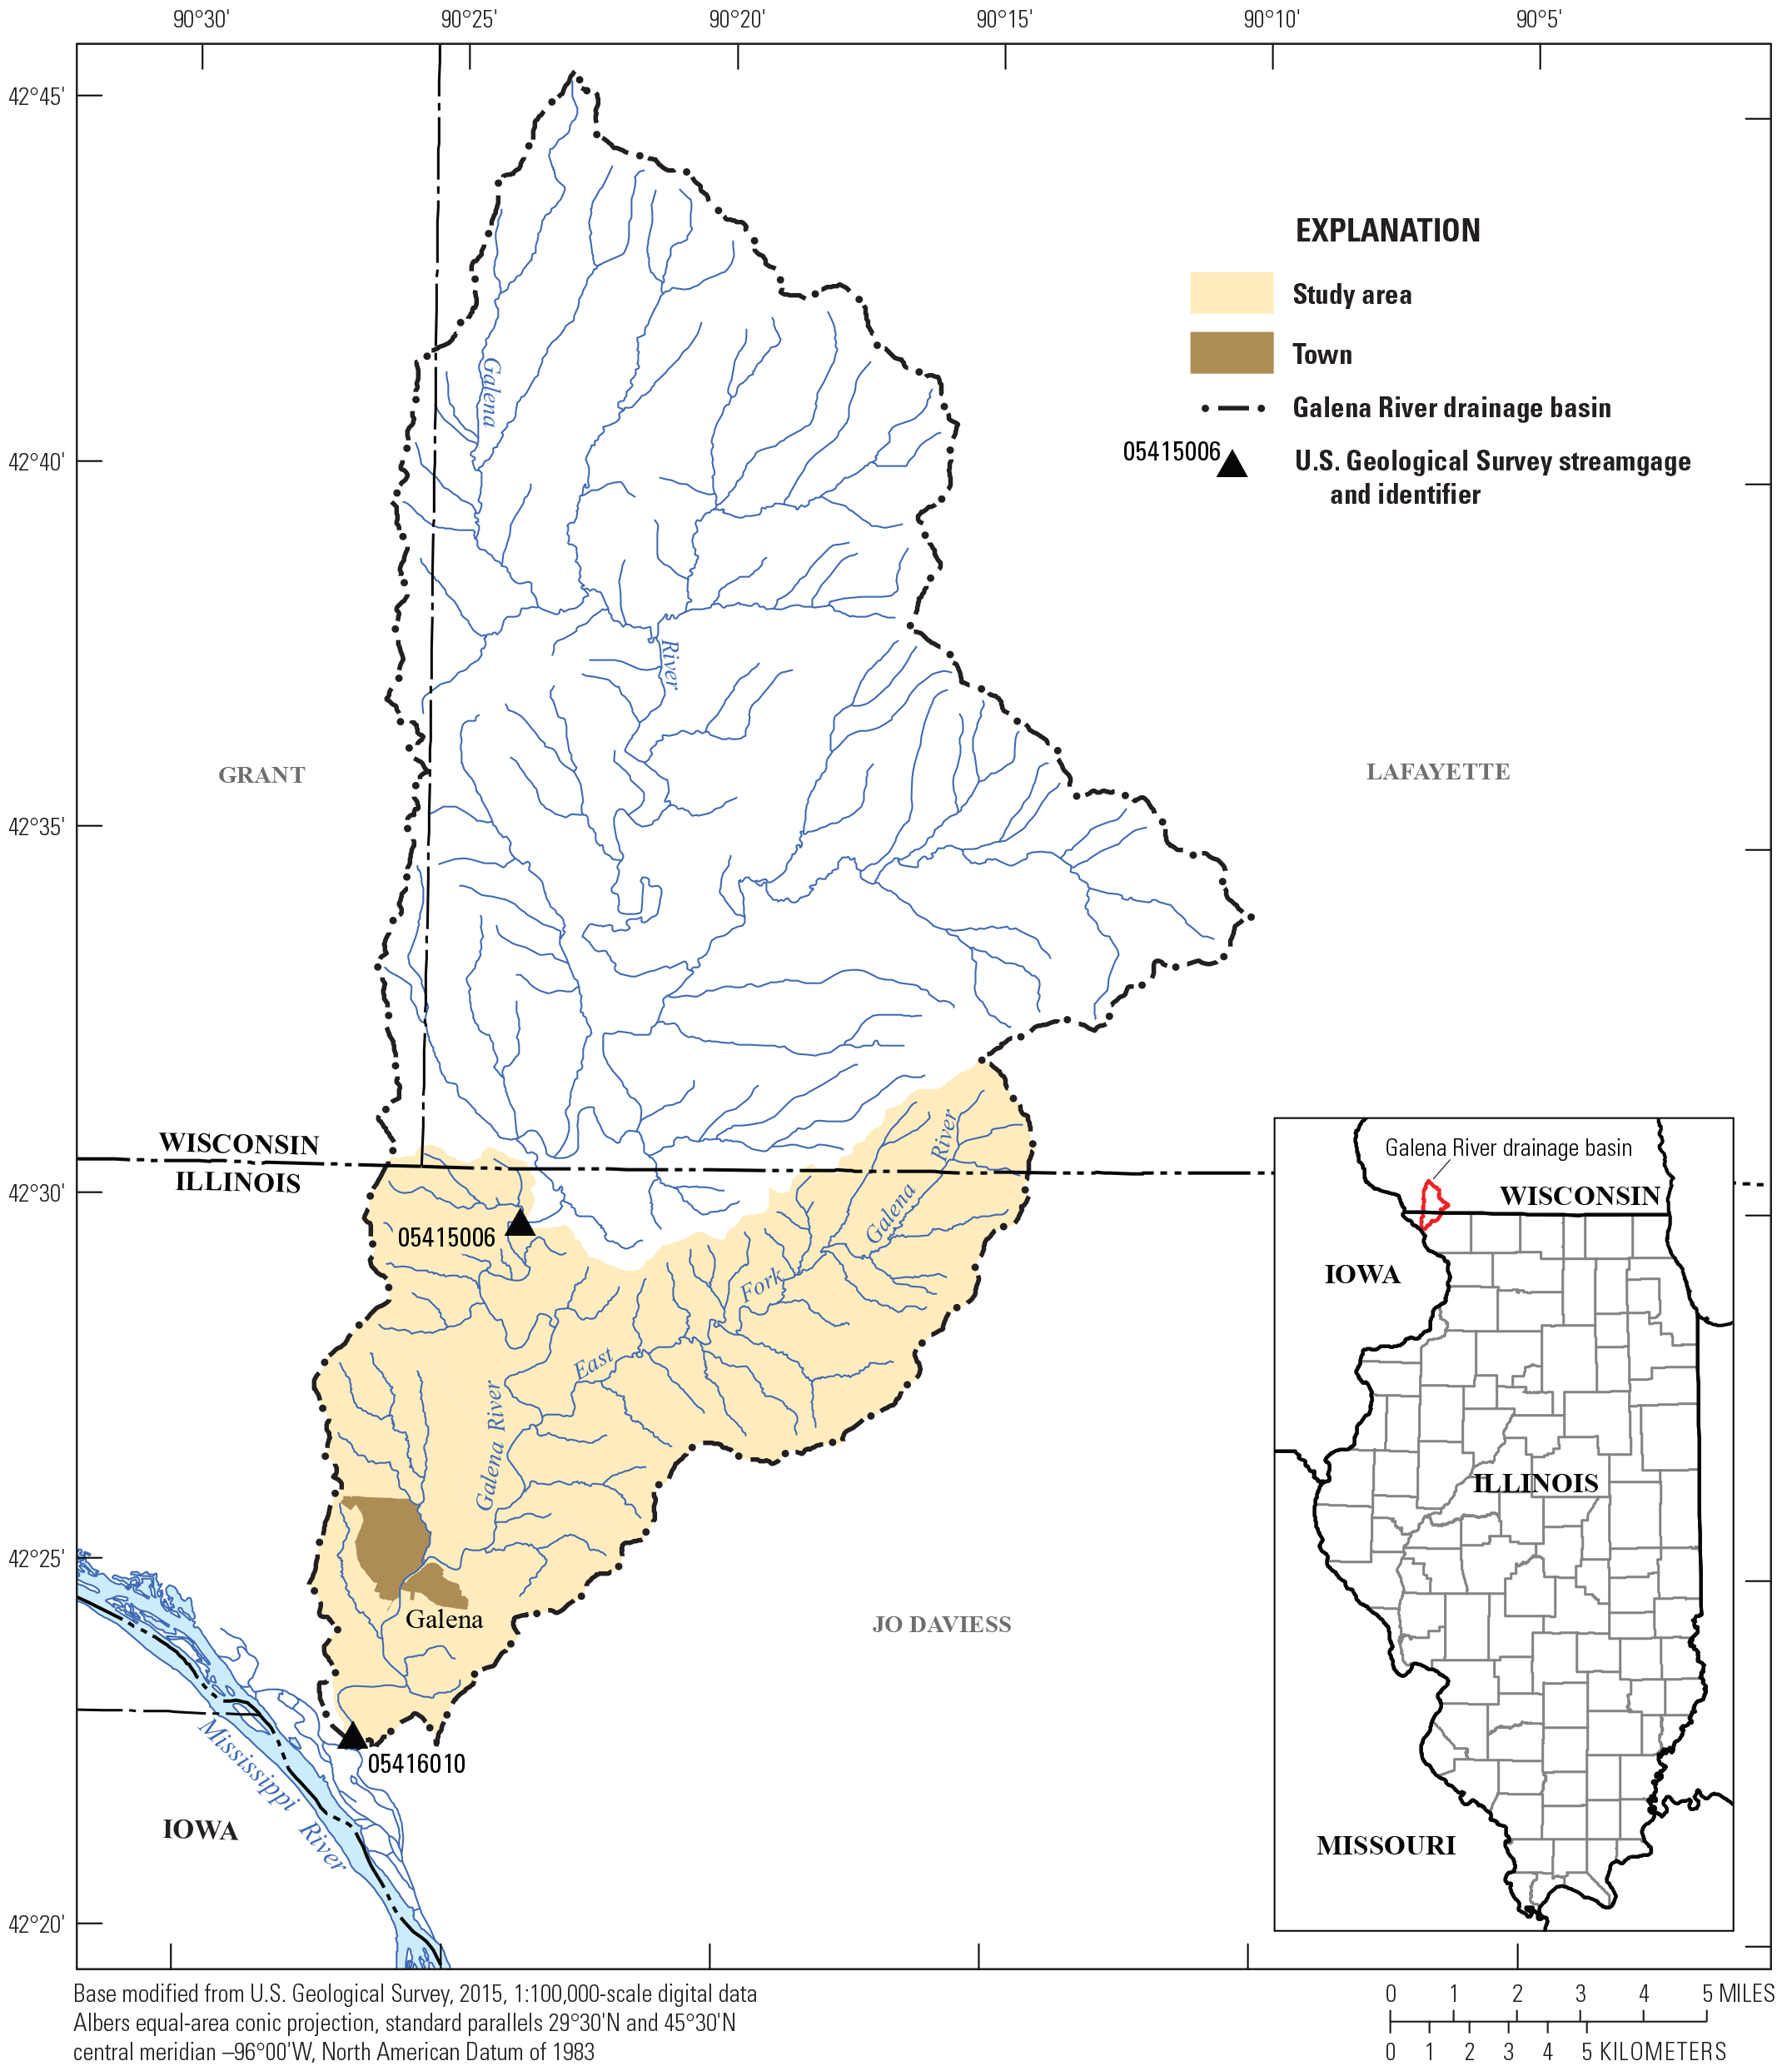 Map outlining Galena watershed within Illinois/Wisconsin with gaging station locations.
                        The lower basin is shaded a different color.